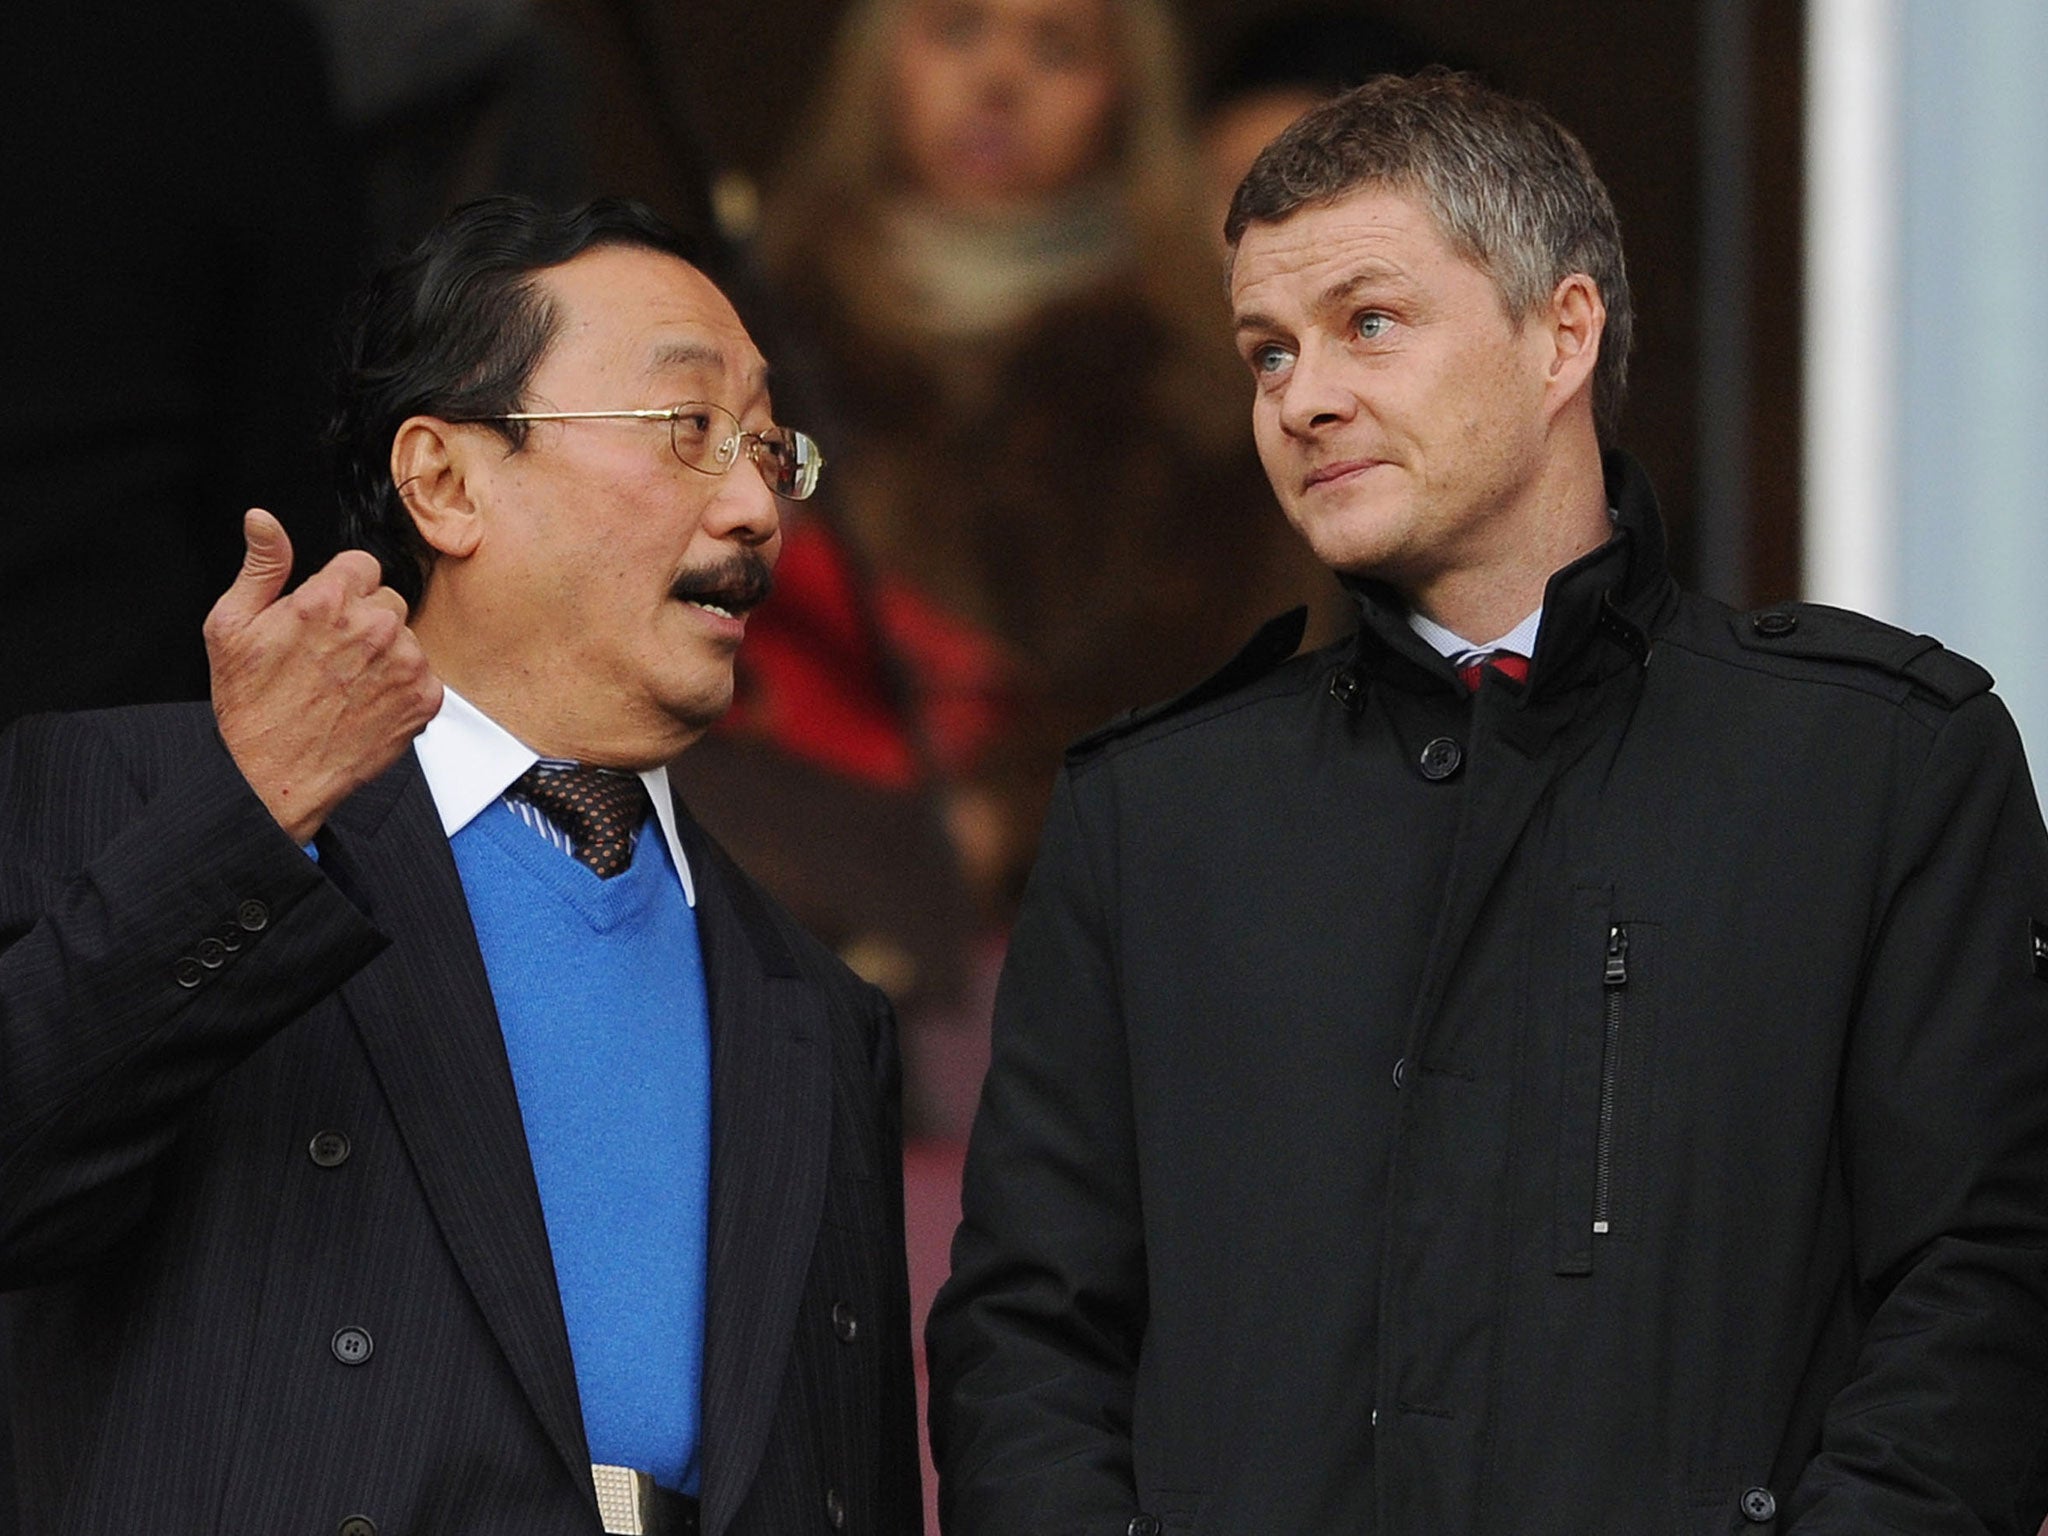 Ole Gunnar Solskjaer (right) and Cardiff City owner Vincent Tan